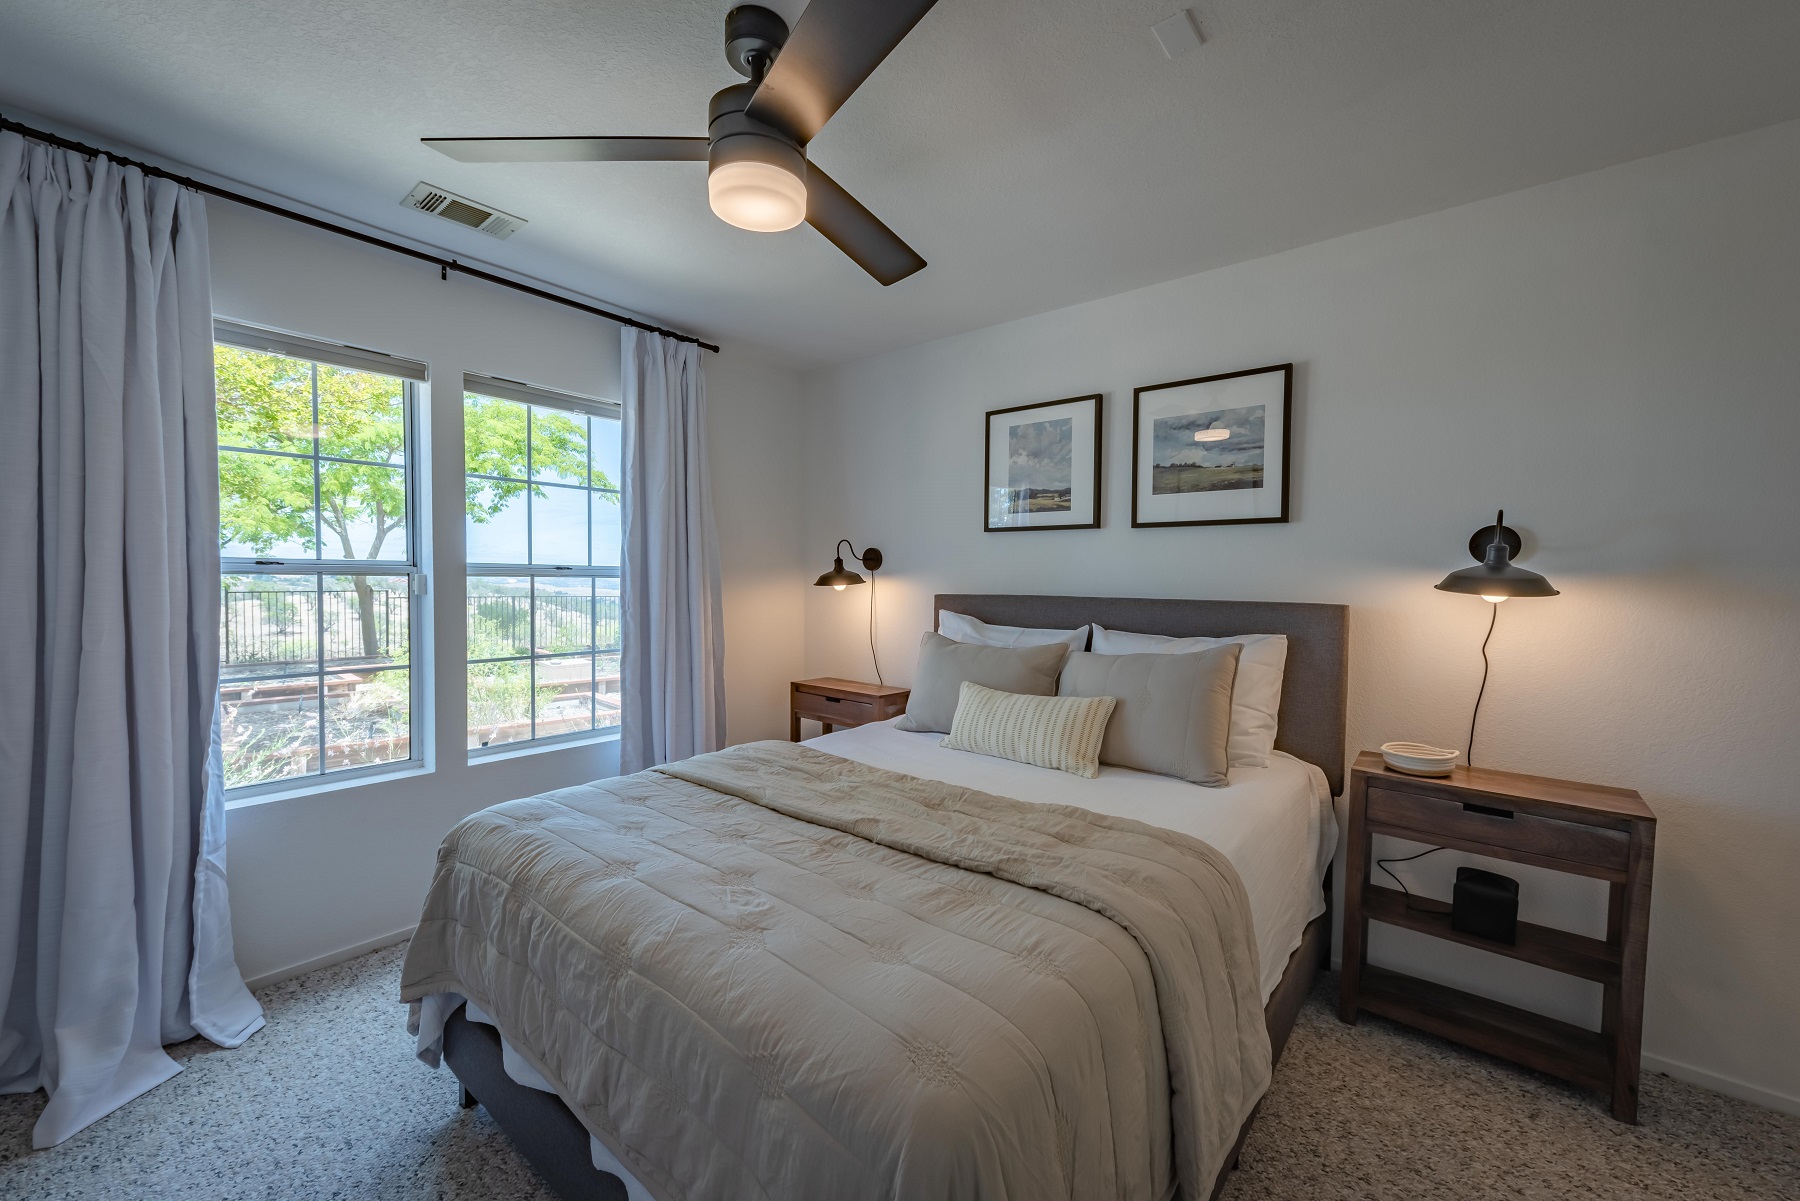 Bedroom 2 with queen bed, ceiling fan and views to the west and overlooking the herb garden